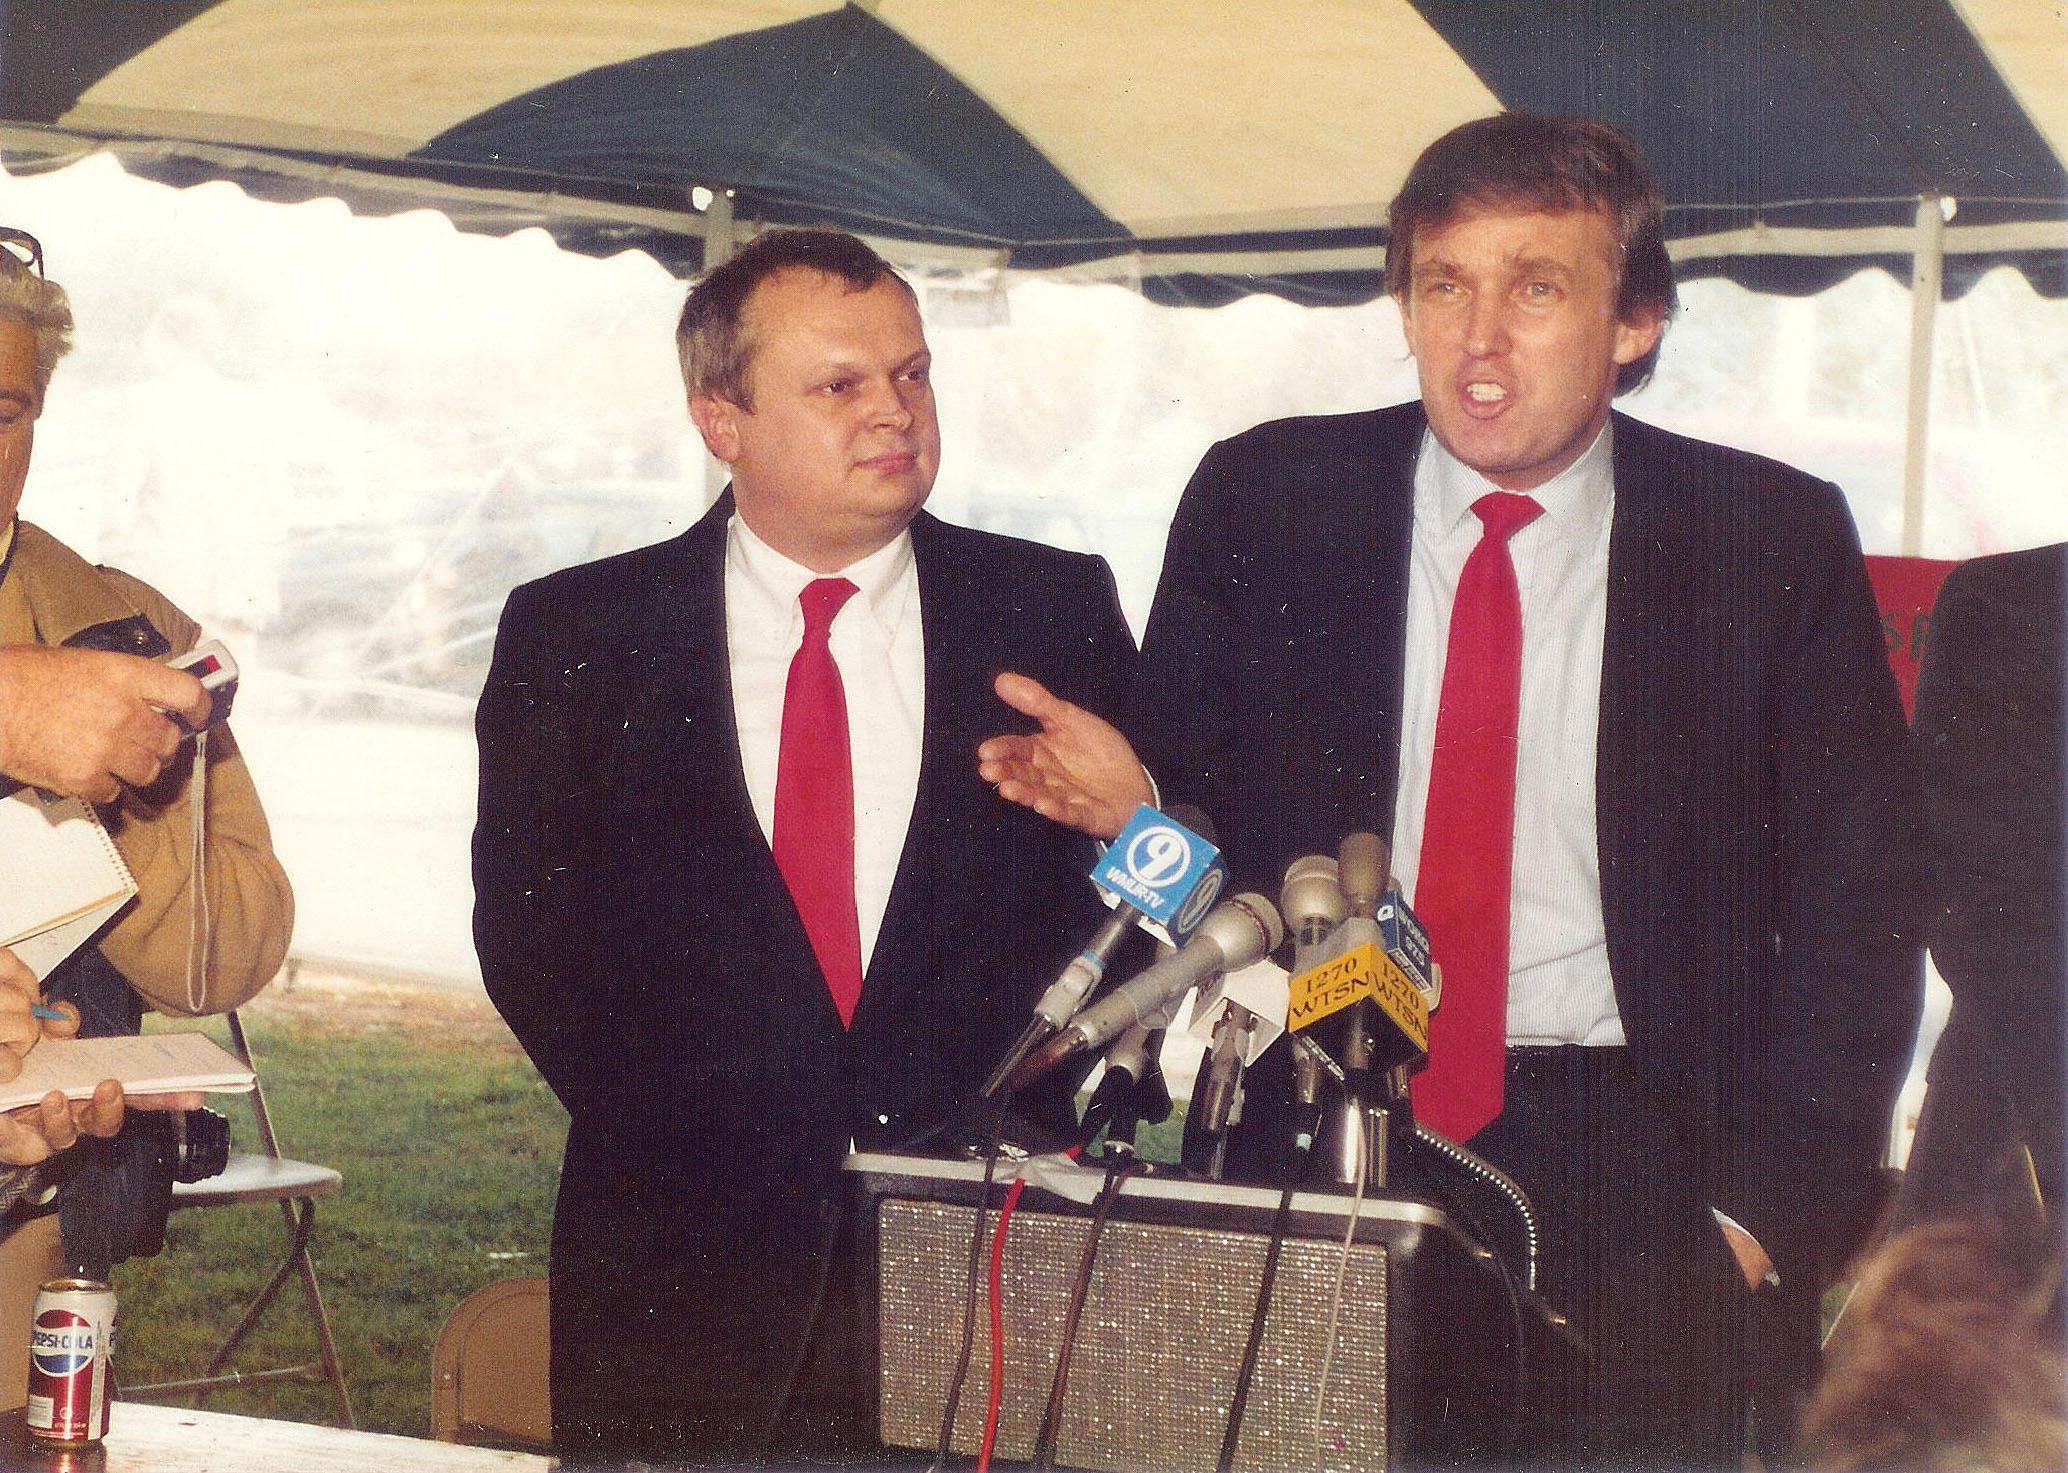 Donald Trump (right) stands beside Mike Dunbar as he speaks at a press conference in Portsmouth, N.H., on Oct. 22, 1987. (Courtesy of Mike Dunbar)